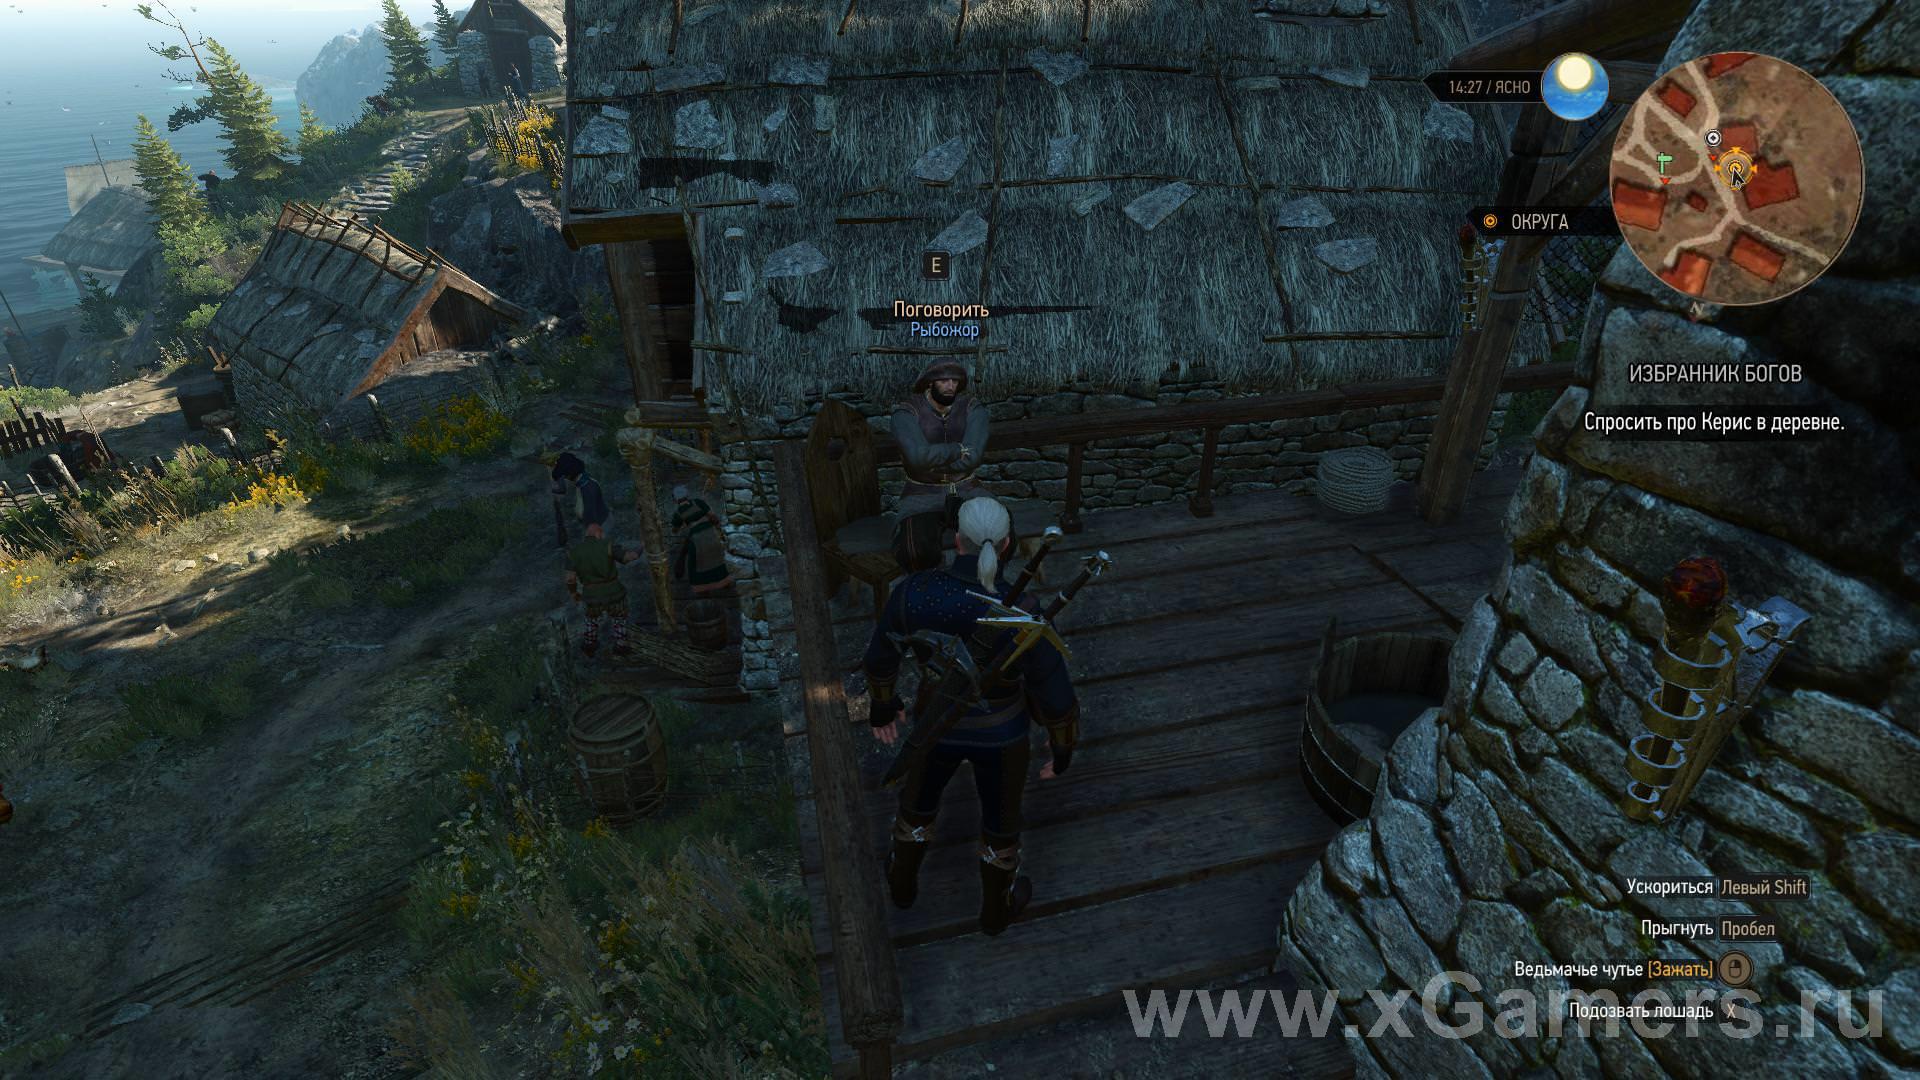 Quest for Keris in The Witcher 3